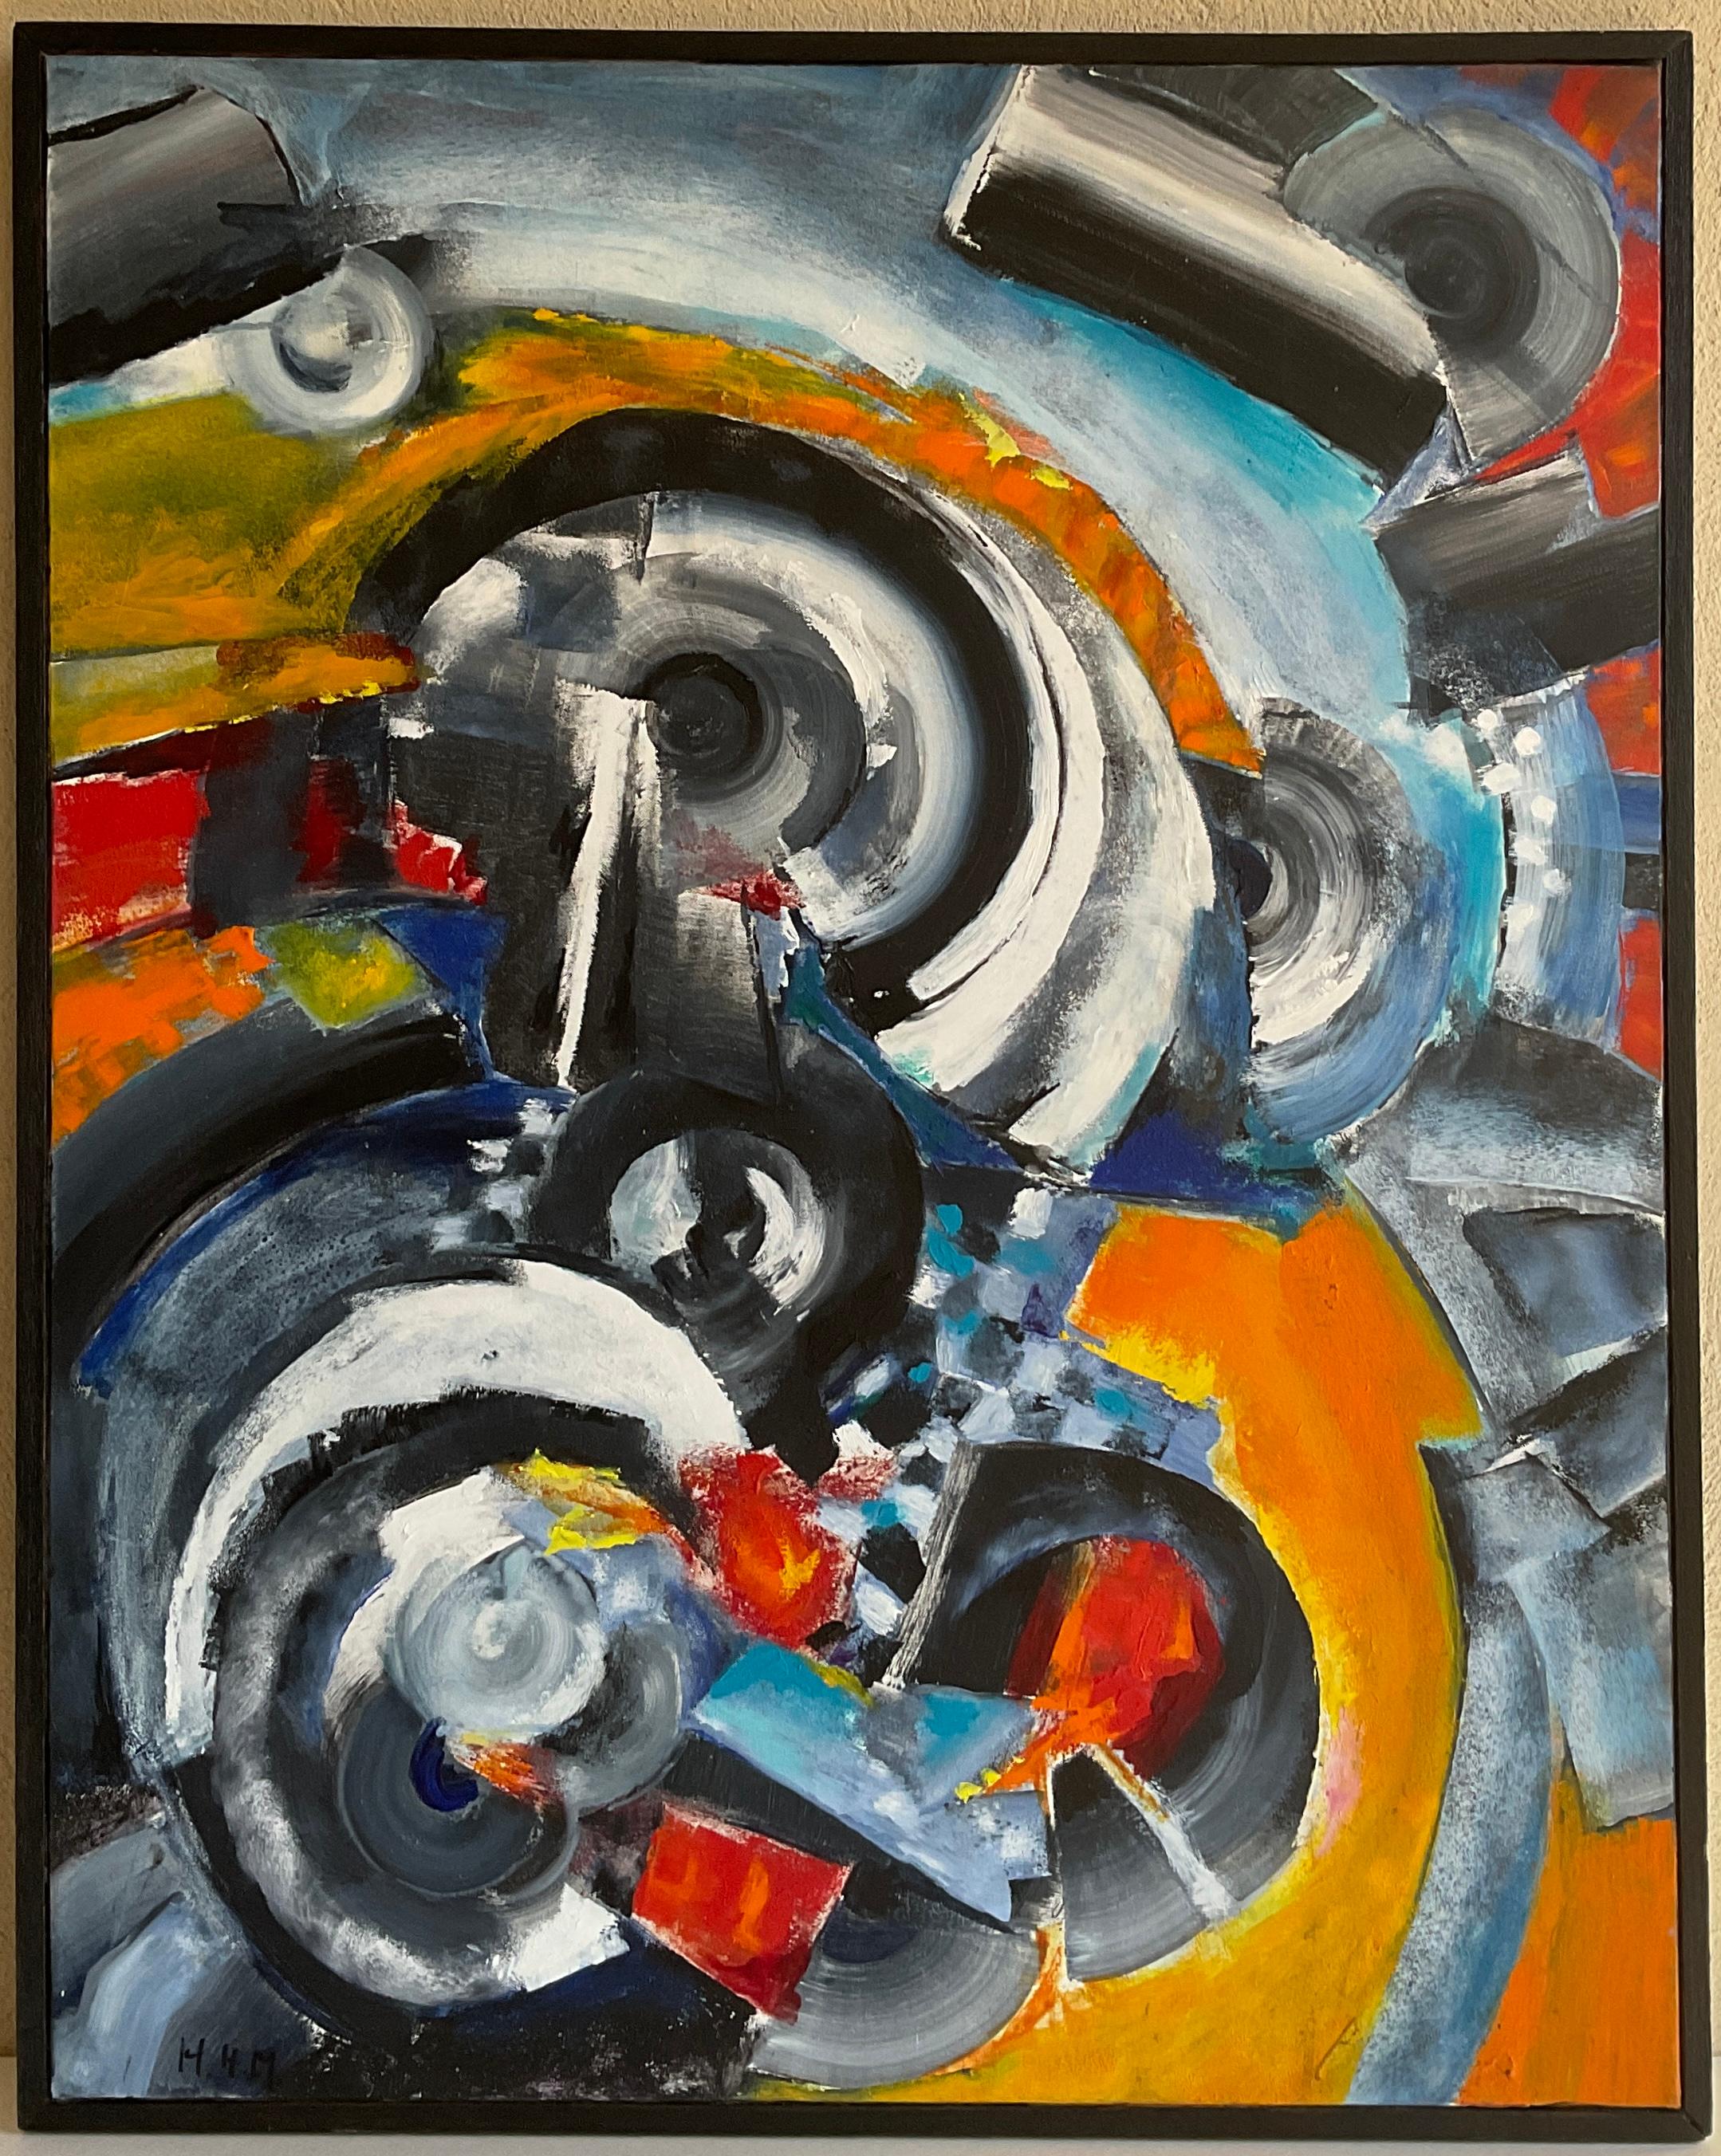 A stunning composition or oil on canvas painting by Heidi Melano, in the manner of Sonia Delaunay. This abstract painting was painted during the period when Heidi Melano was already creating her most famous mosaics in collaboration with Fernand